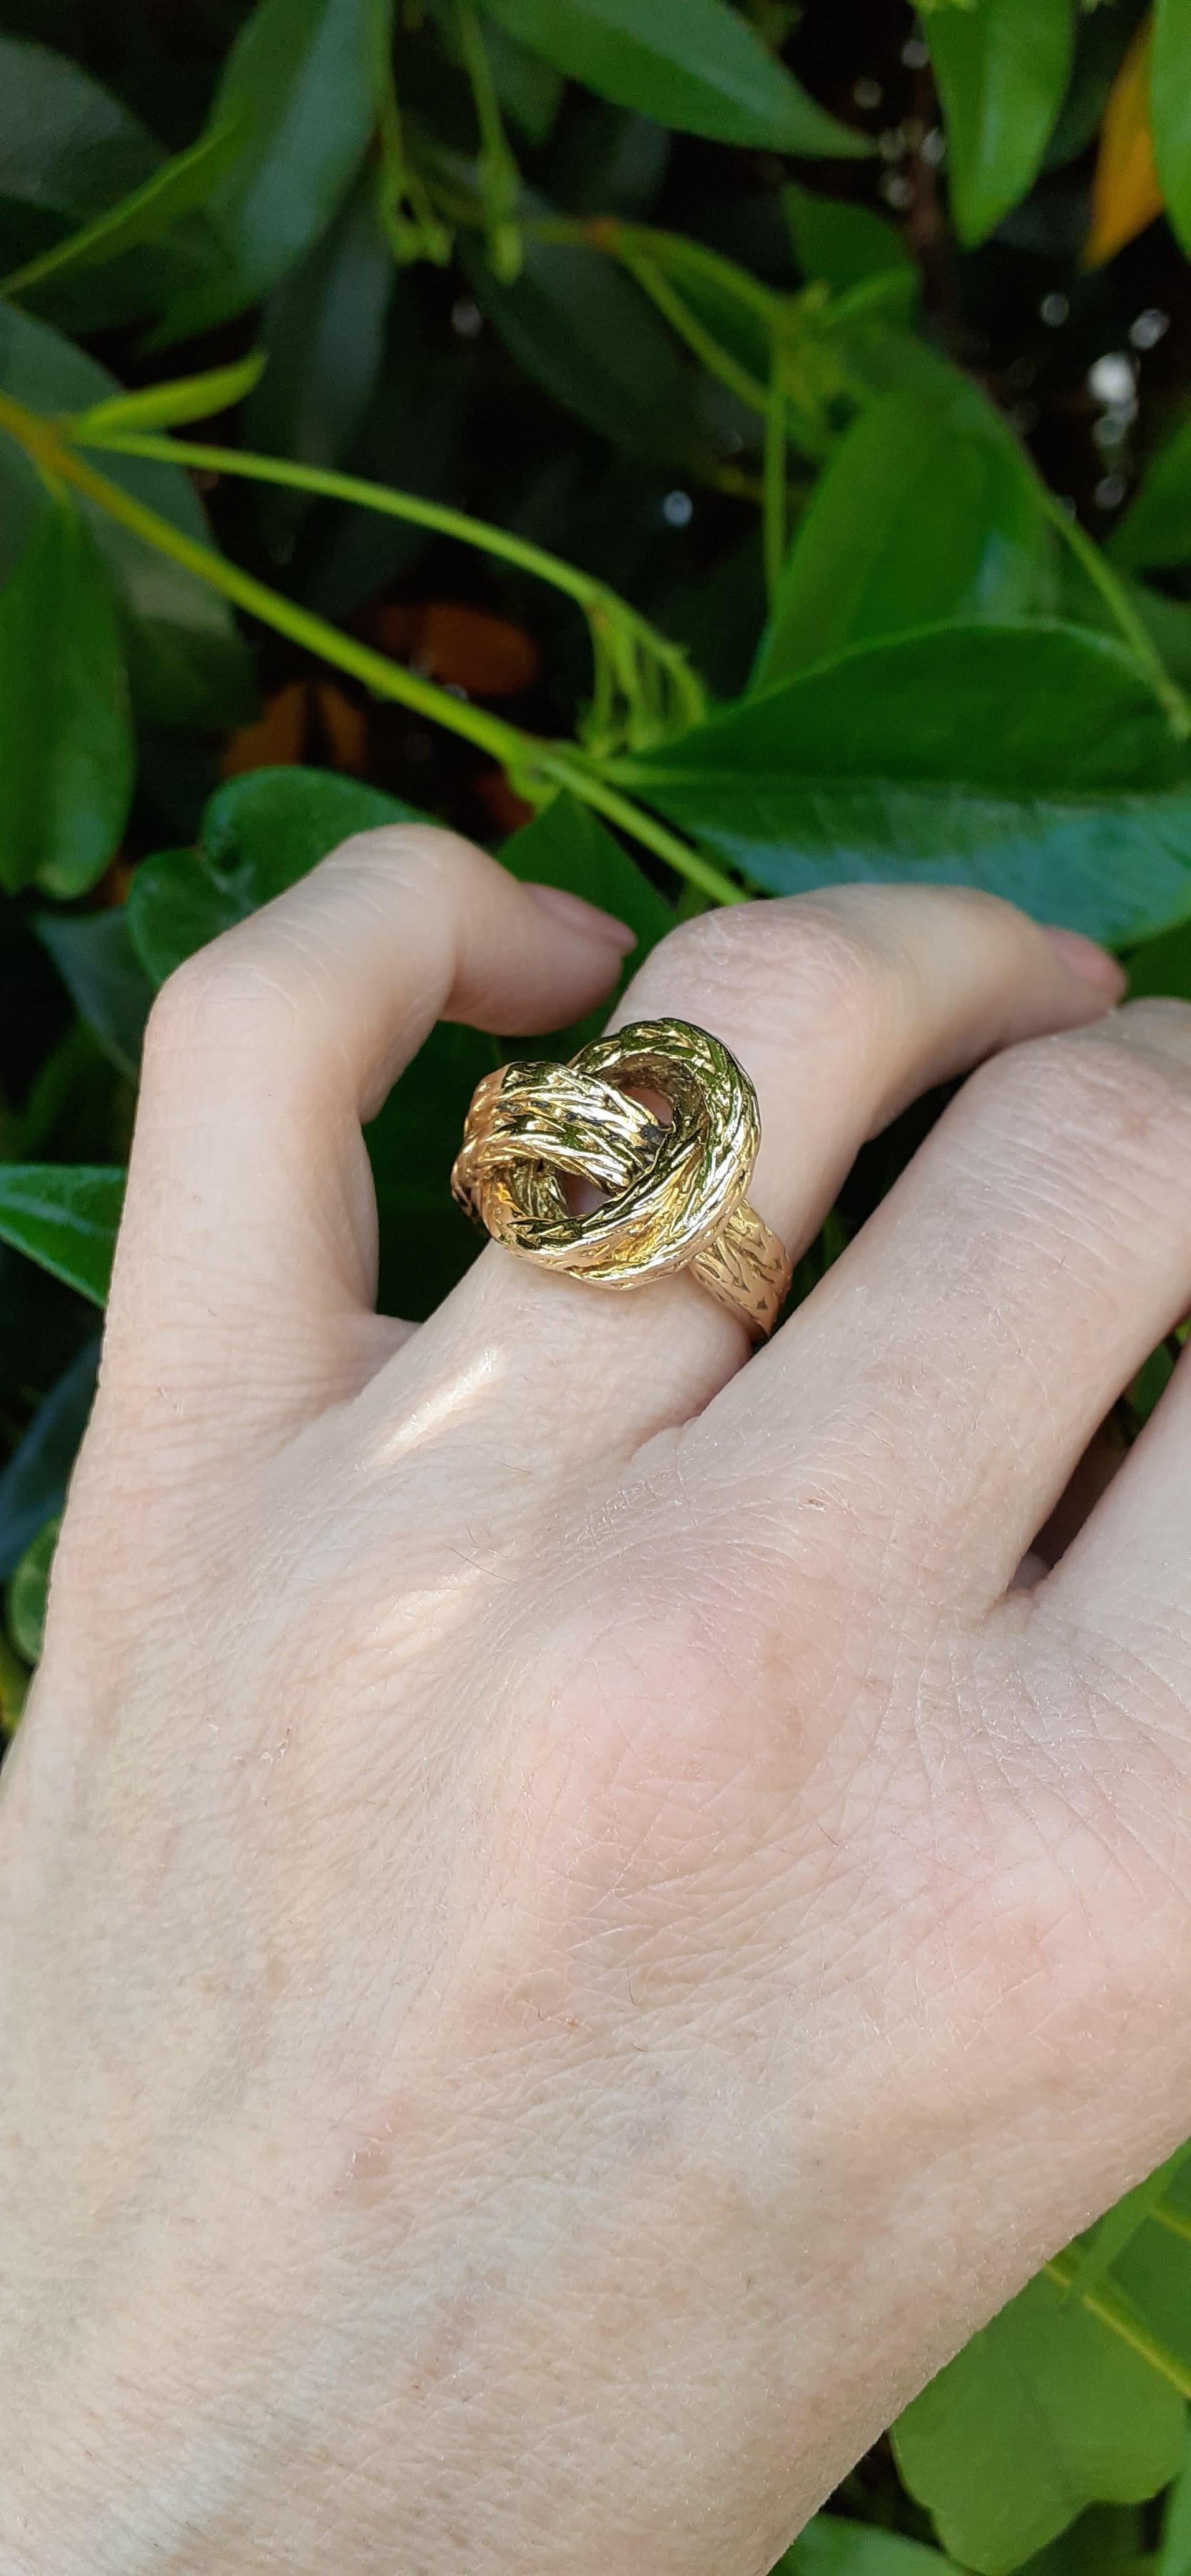 Exceptional and Gorgeous Authentic Hermès Ring

Pattern: Knot

Model: Vendôme

Vintage, from the 60's

Made of Braided Yellow Gold 18K 

